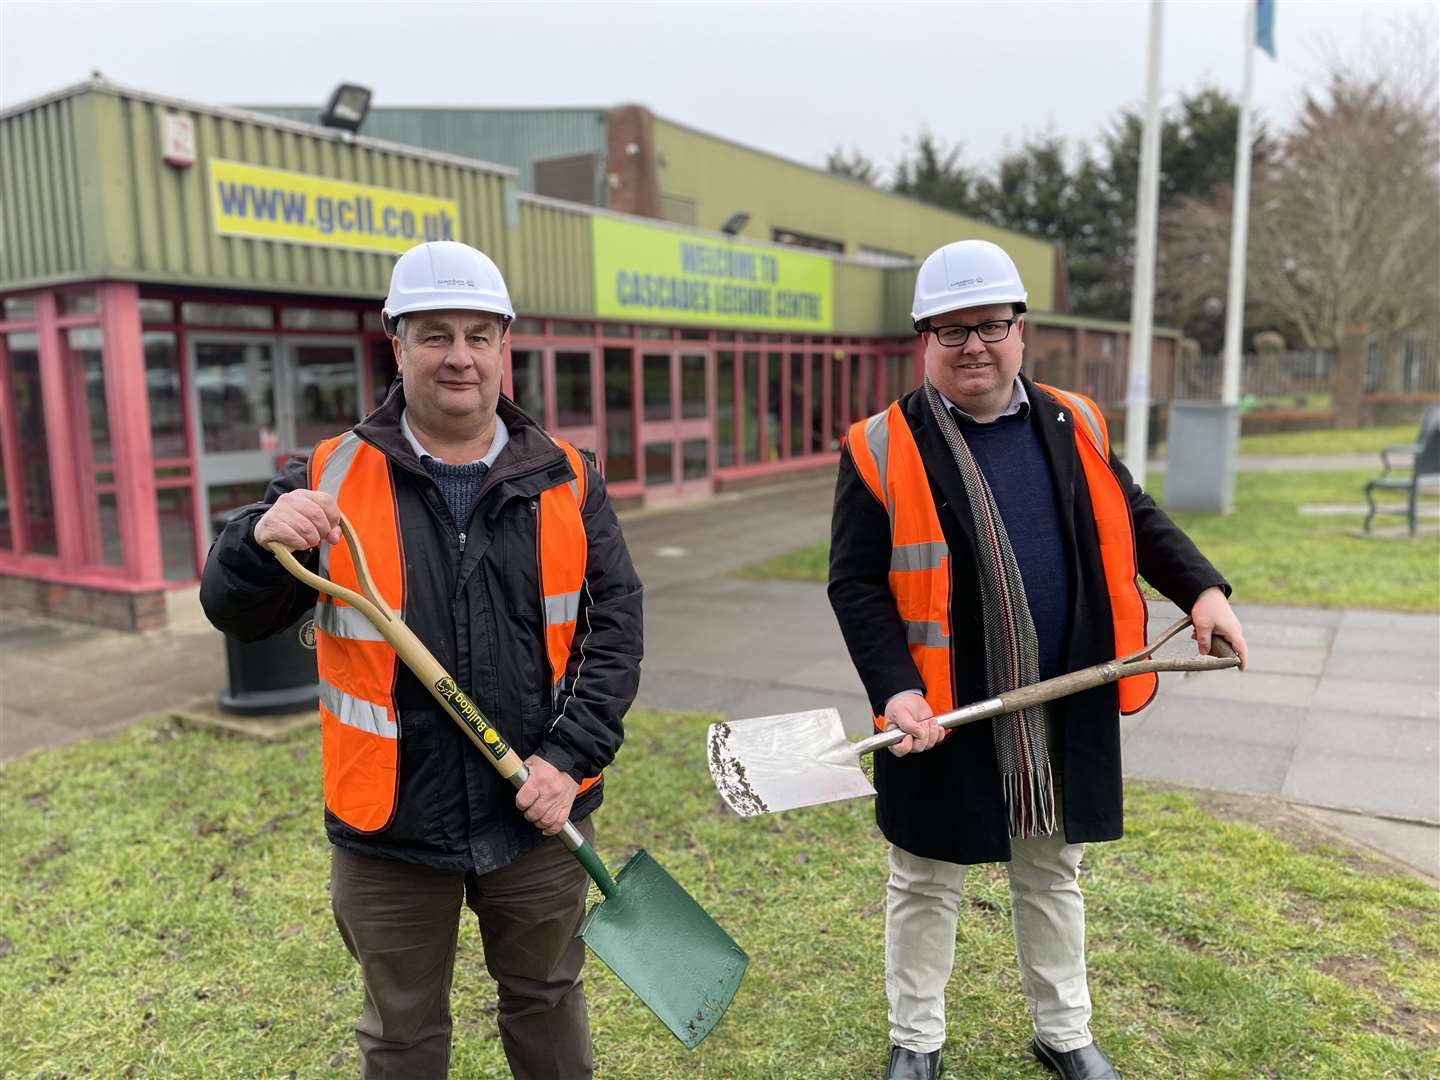 Cllr John Burden and Cllr Shane Mochrie-Cox on site at Cascades where a new leisure centre is to be built